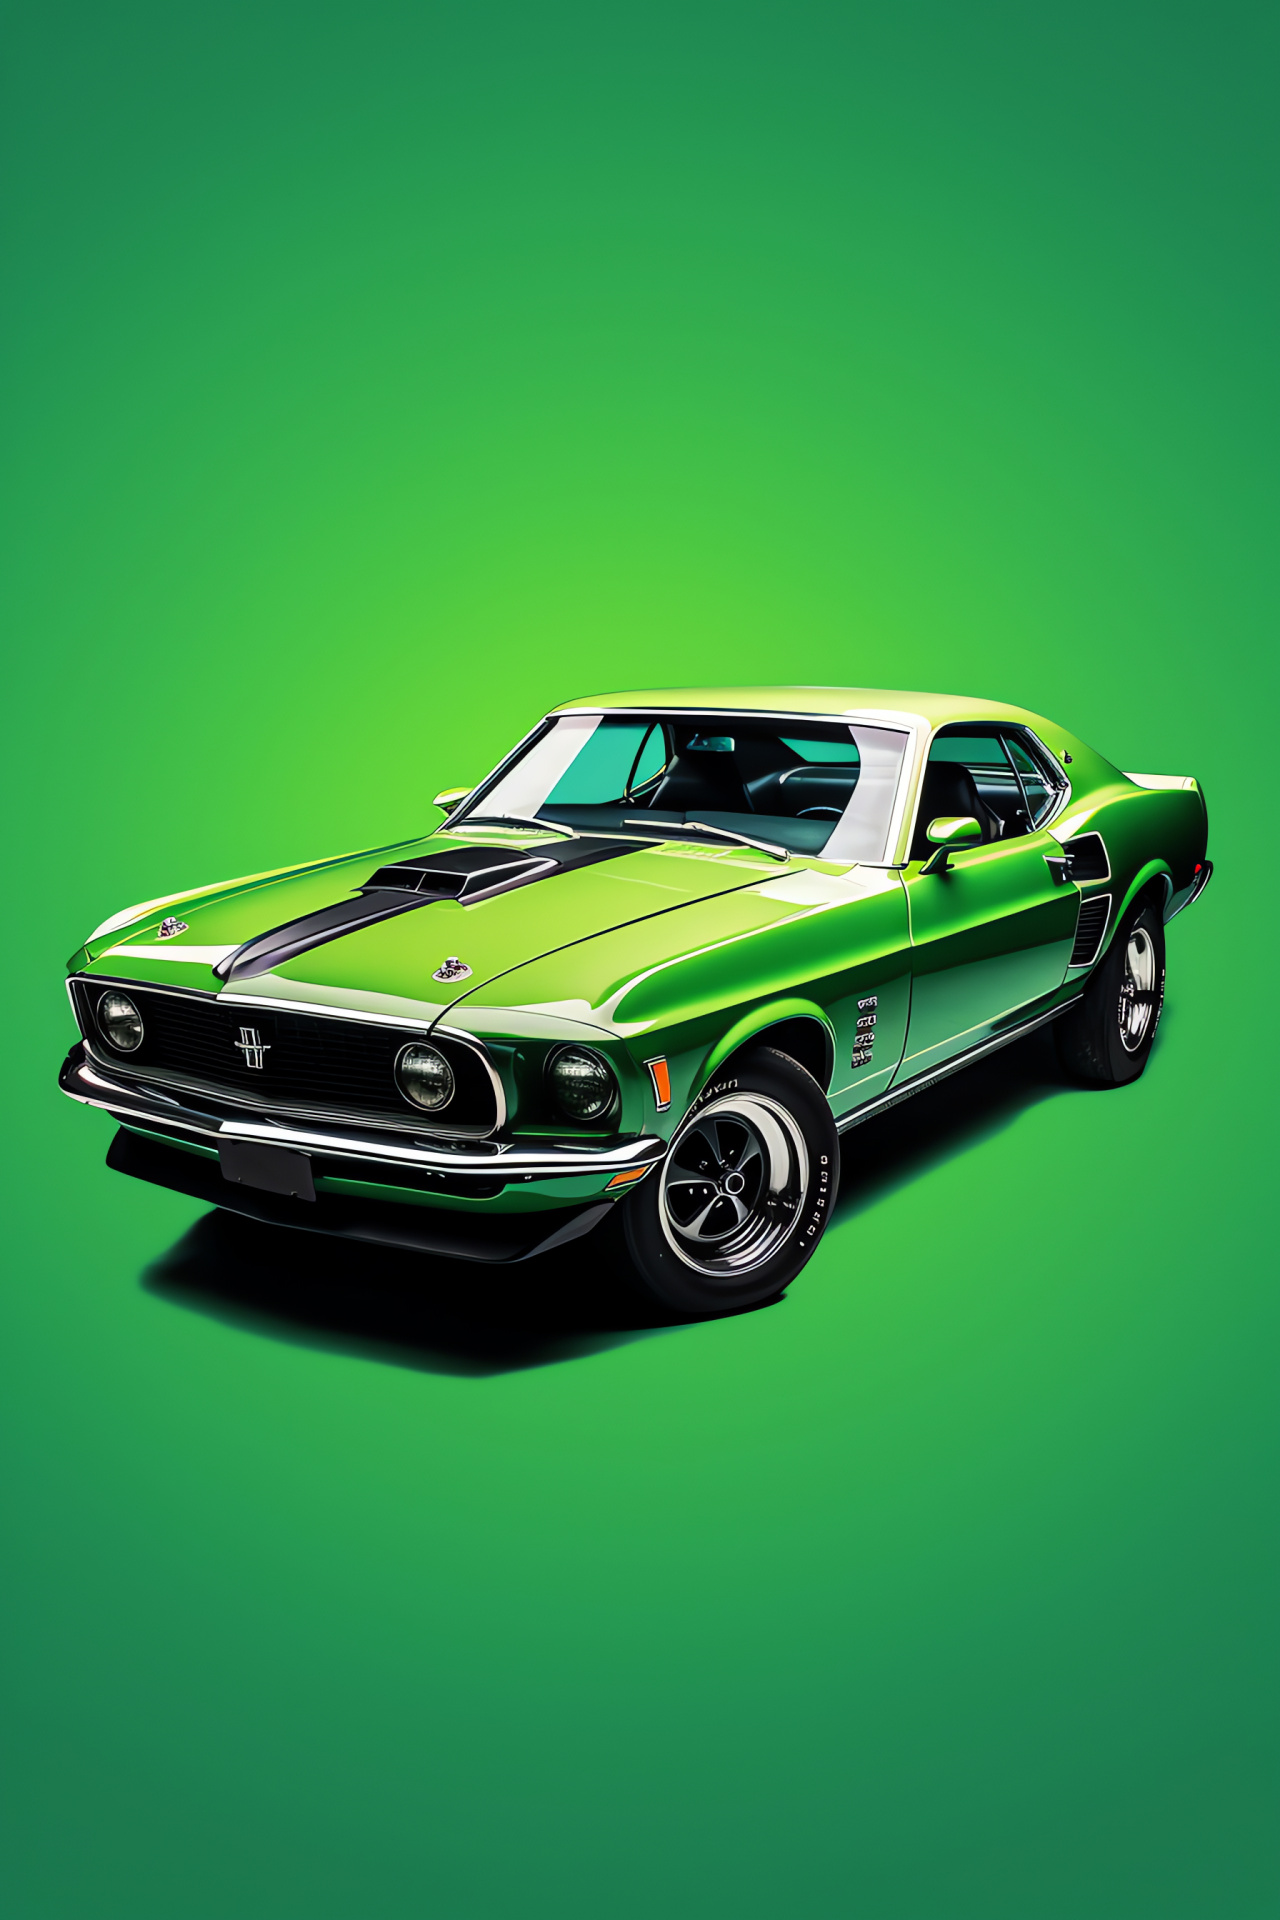 Classic Ford Mustang, Vintage auto angle, Green Mustang backdrop, High elevation capture, Automotive nostalgia, HD Phone Image